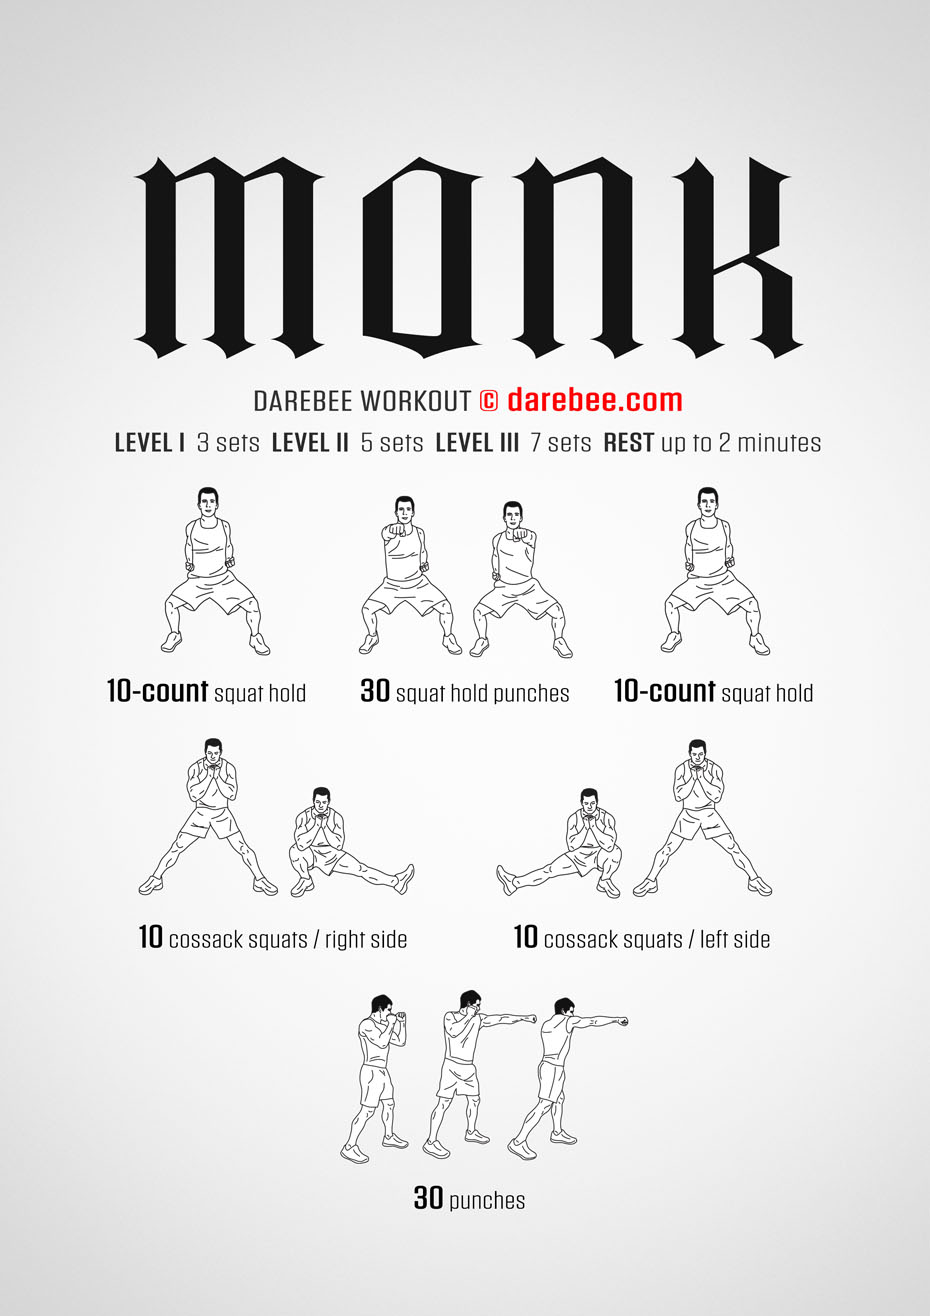 Monk is a DAREBEE home fitness no-equipment total body strength and tone workout with a significant cardiovascular component.